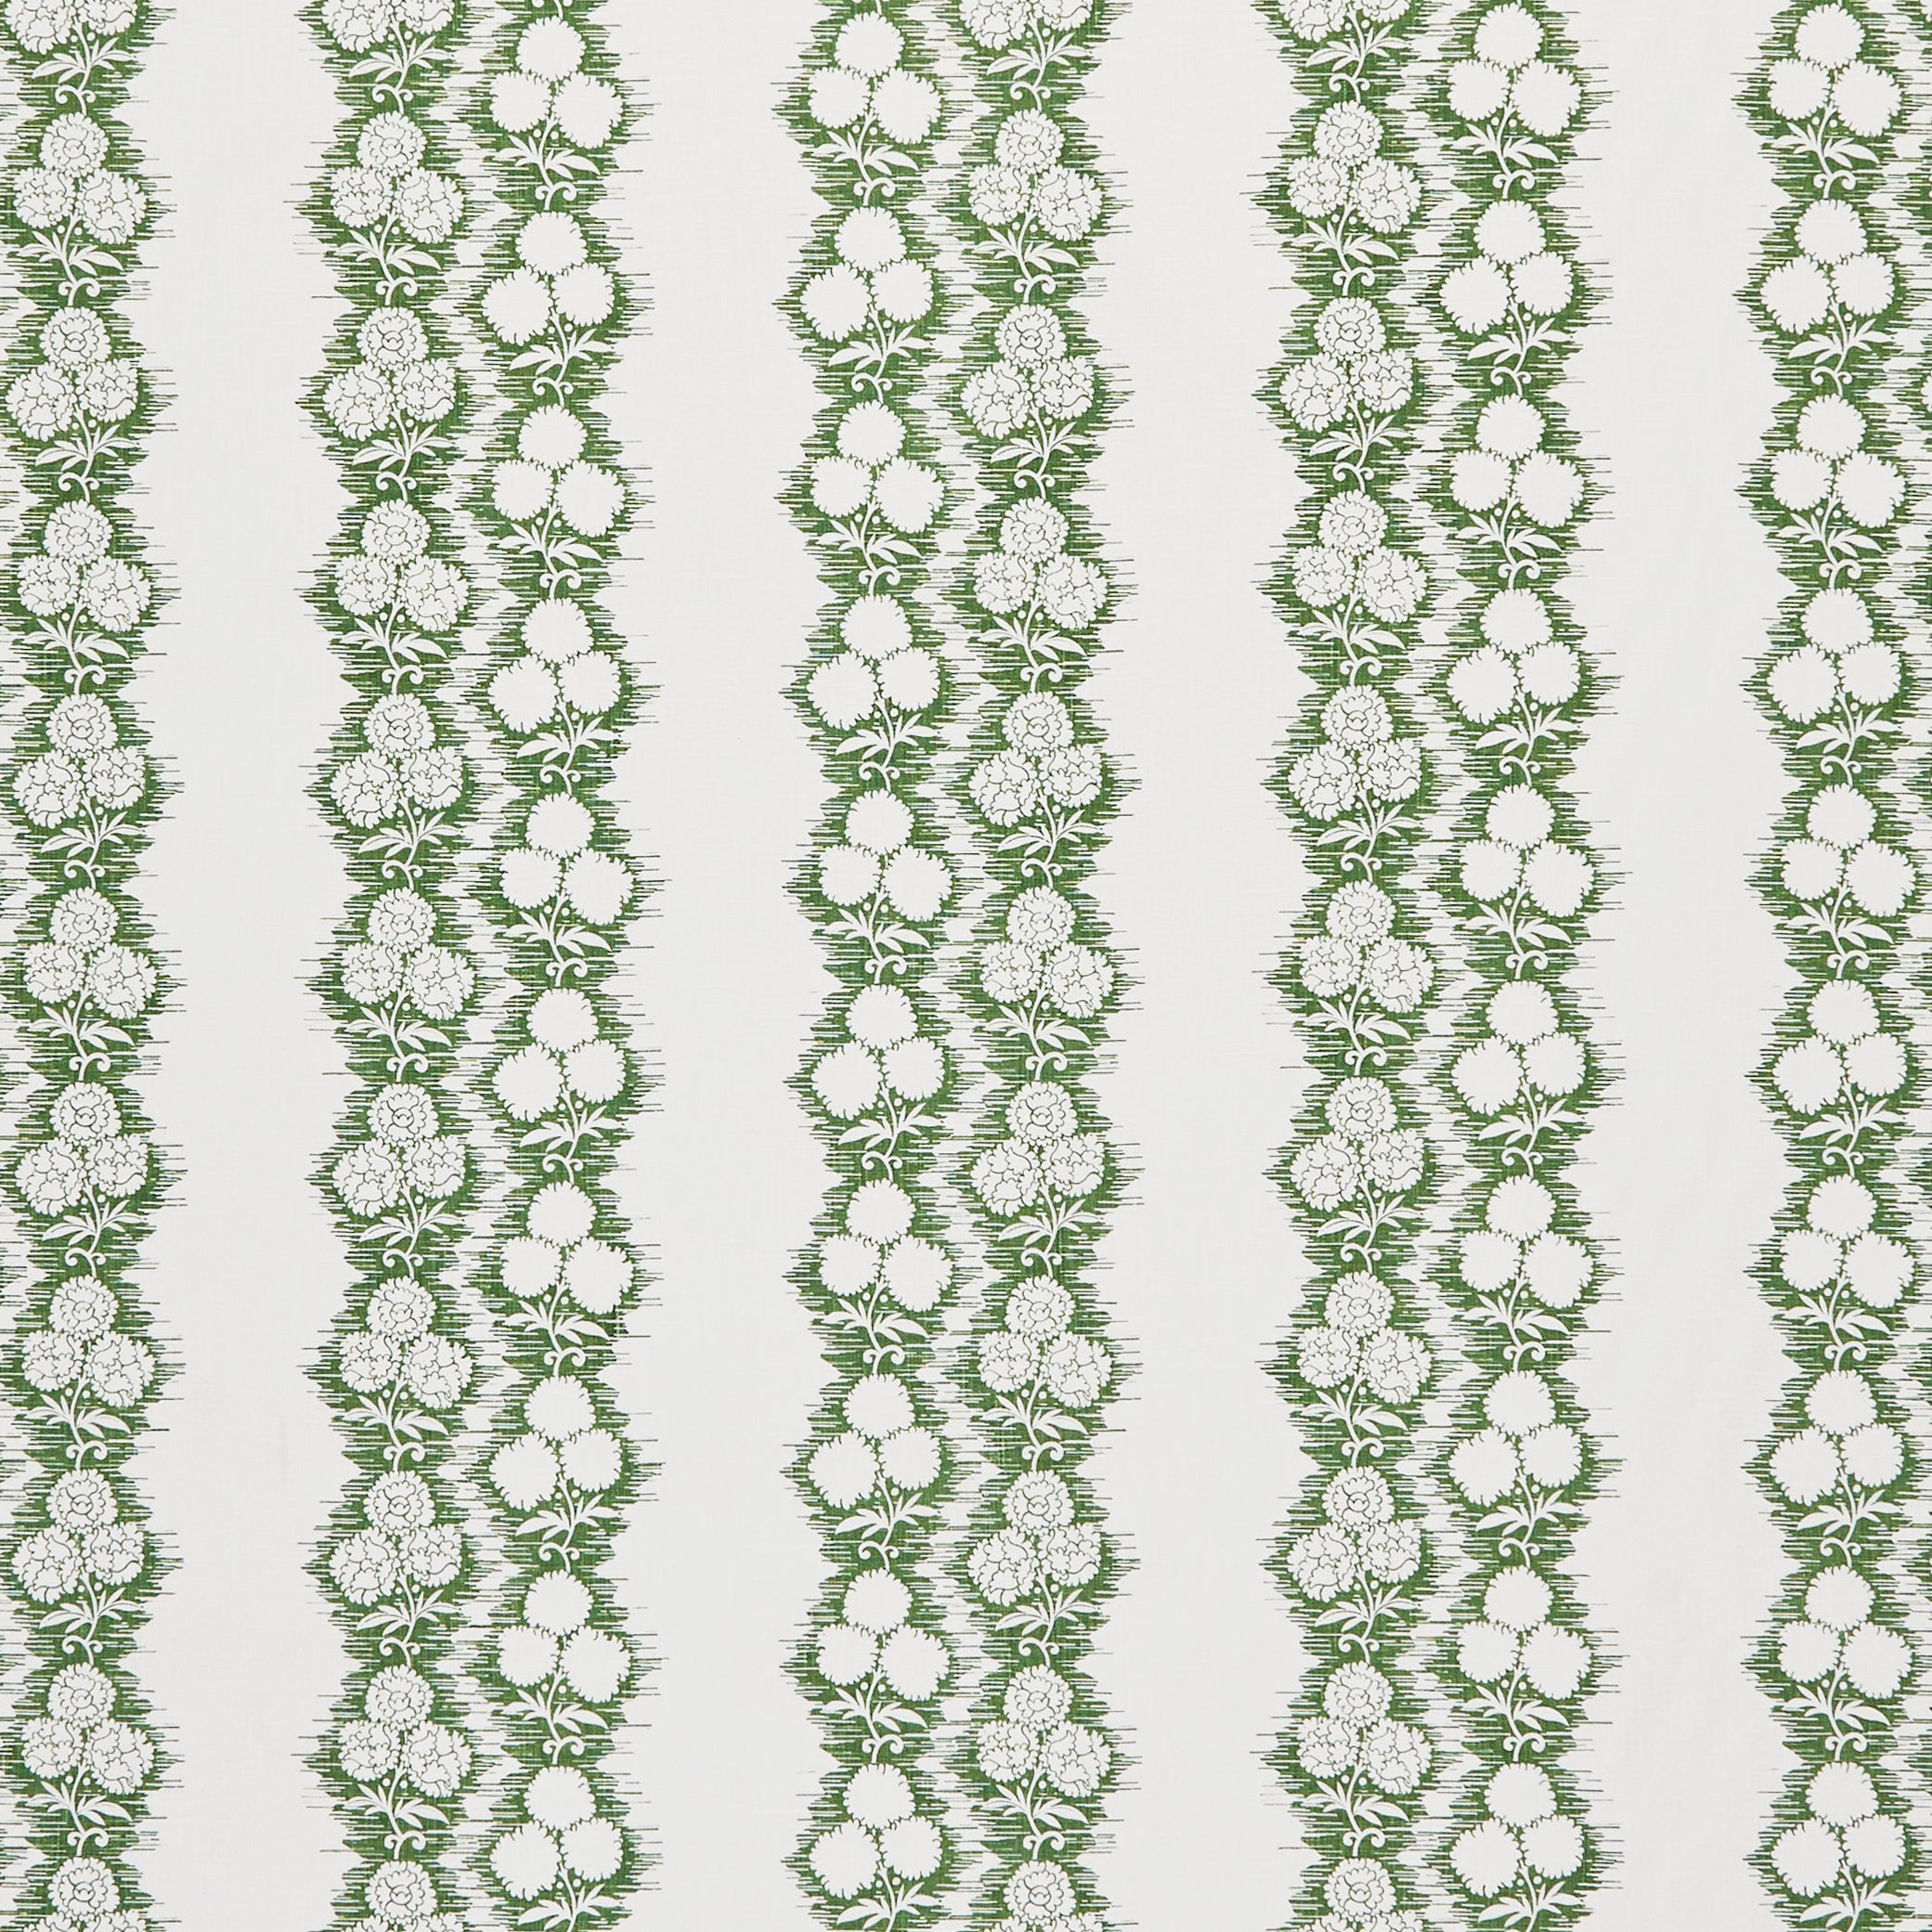 Fabric in a botanical stripe print in green on a white field.